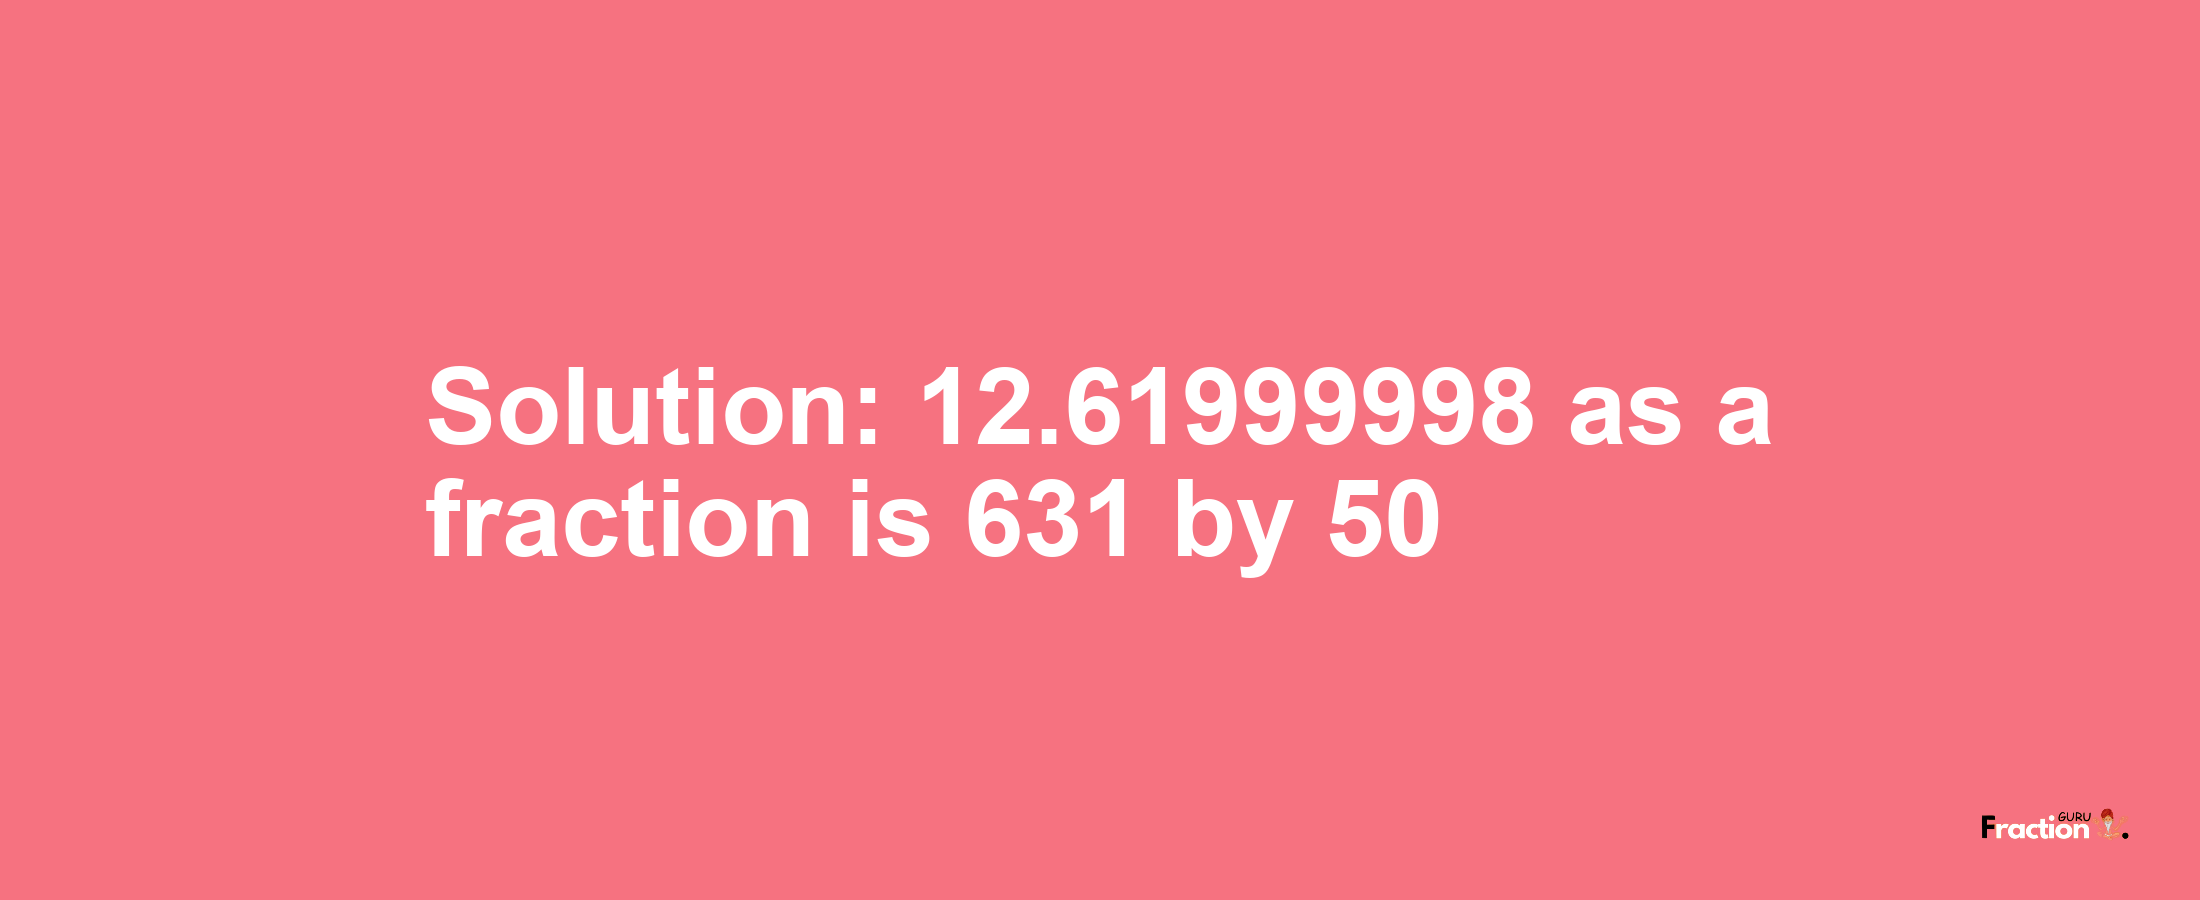 Solution:12.61999998 as a fraction is 631/50